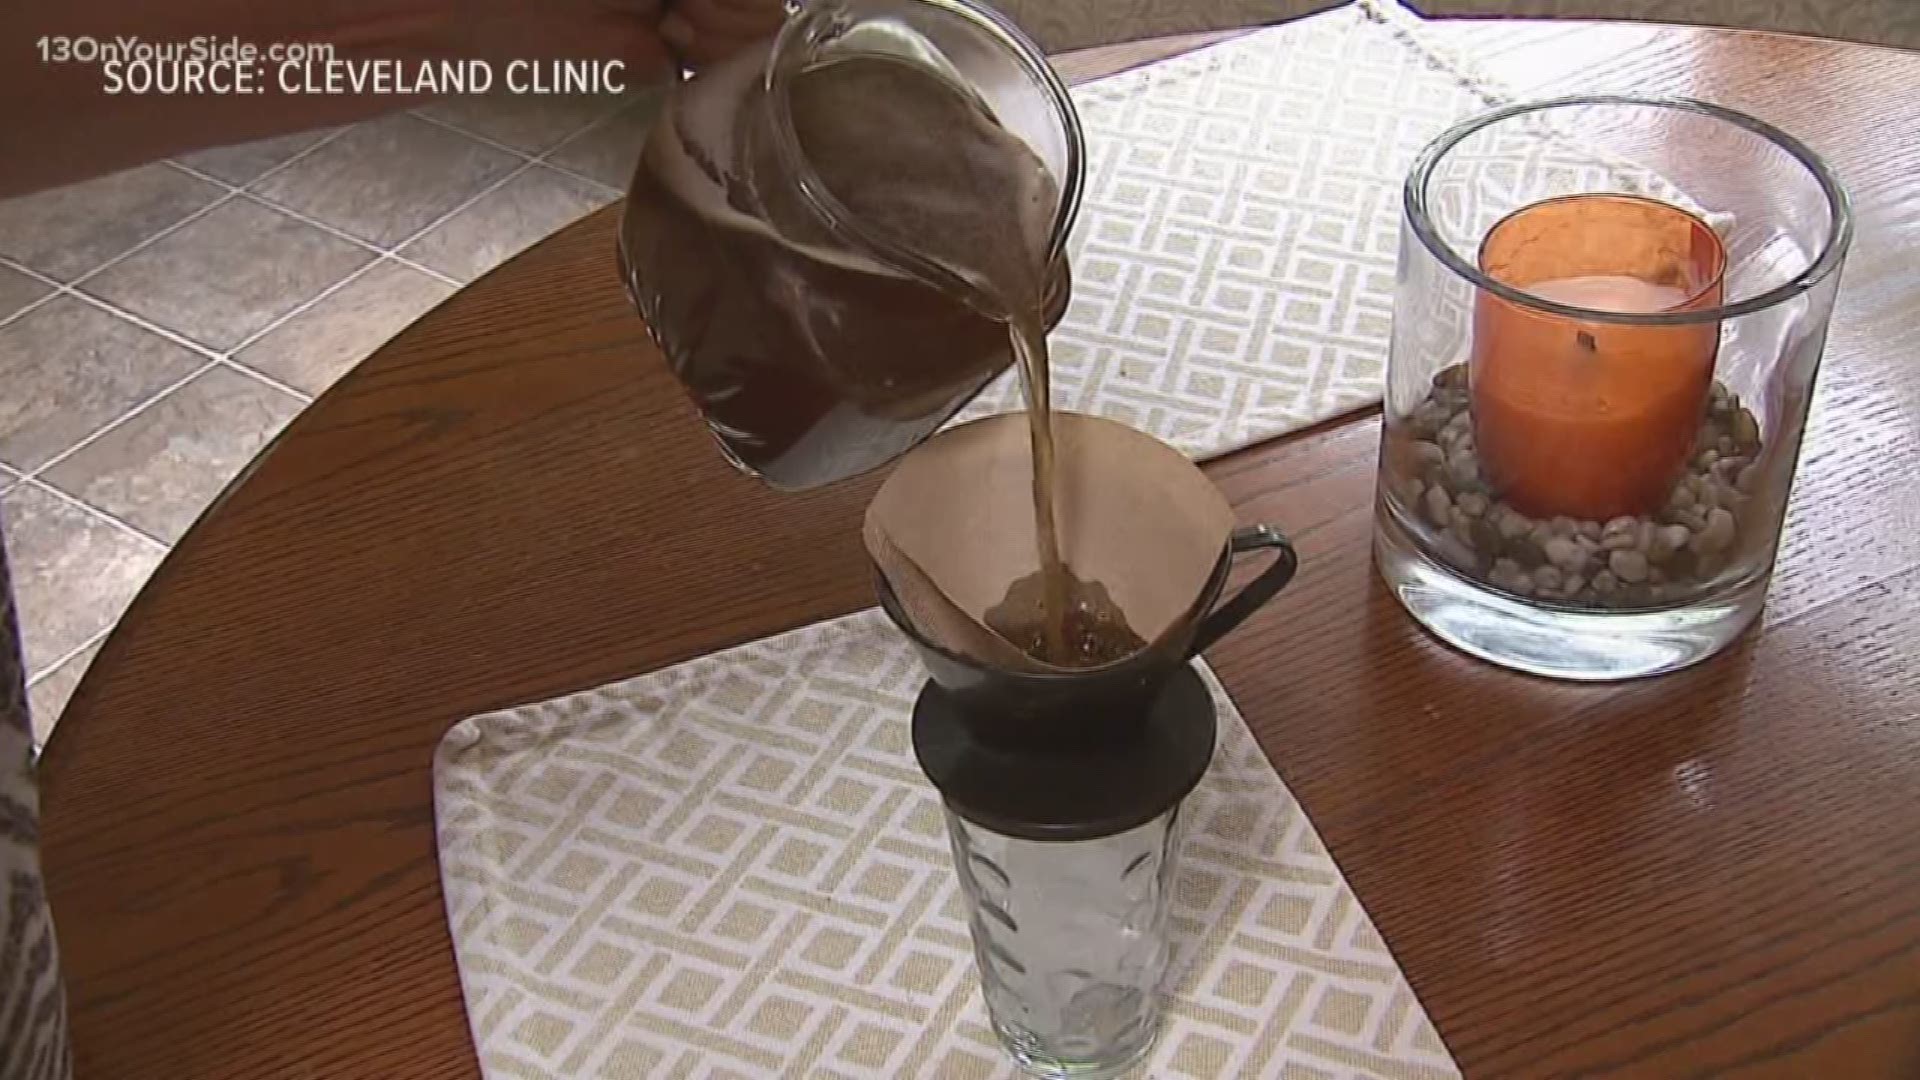 What type of coffee is better for your health – cold brew or hot brew? Wellness expert Dr. Michael Roizen weighs in.